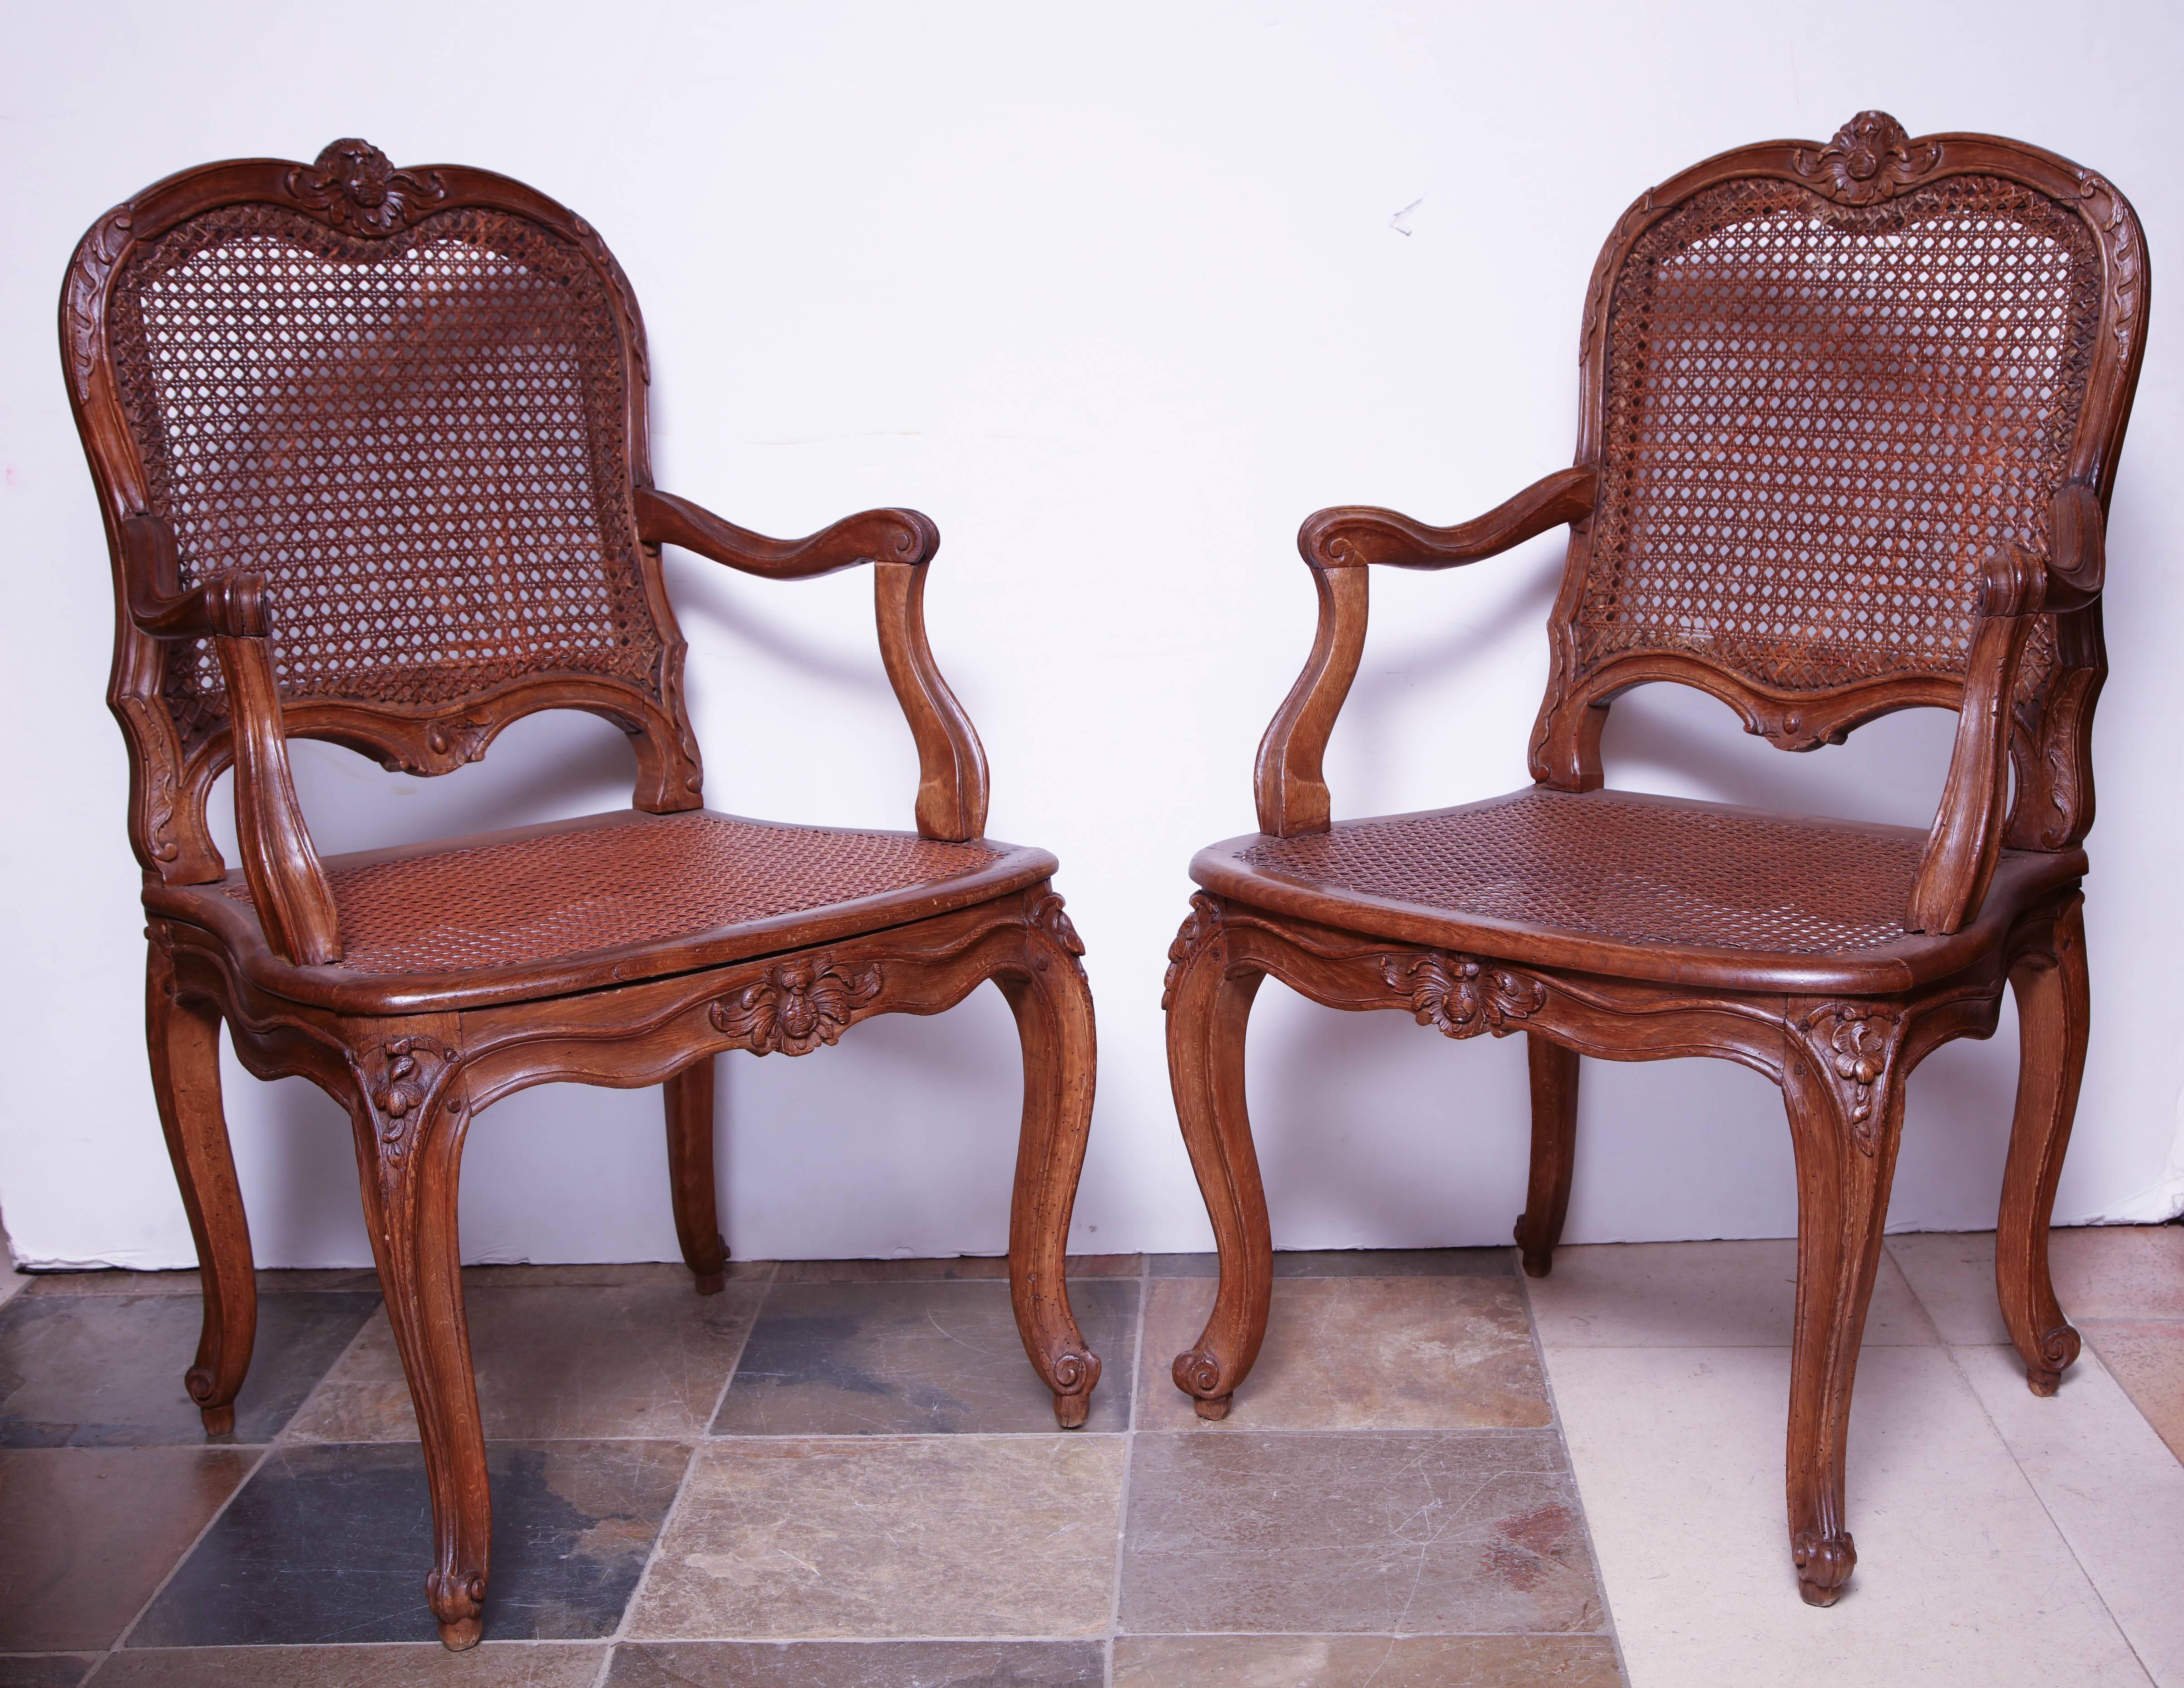 Pair of Louis XV carved Provincial Fauteil's with caned seats and backrests with silk upholstered cushions, carved crests, rails, arms, and legs.